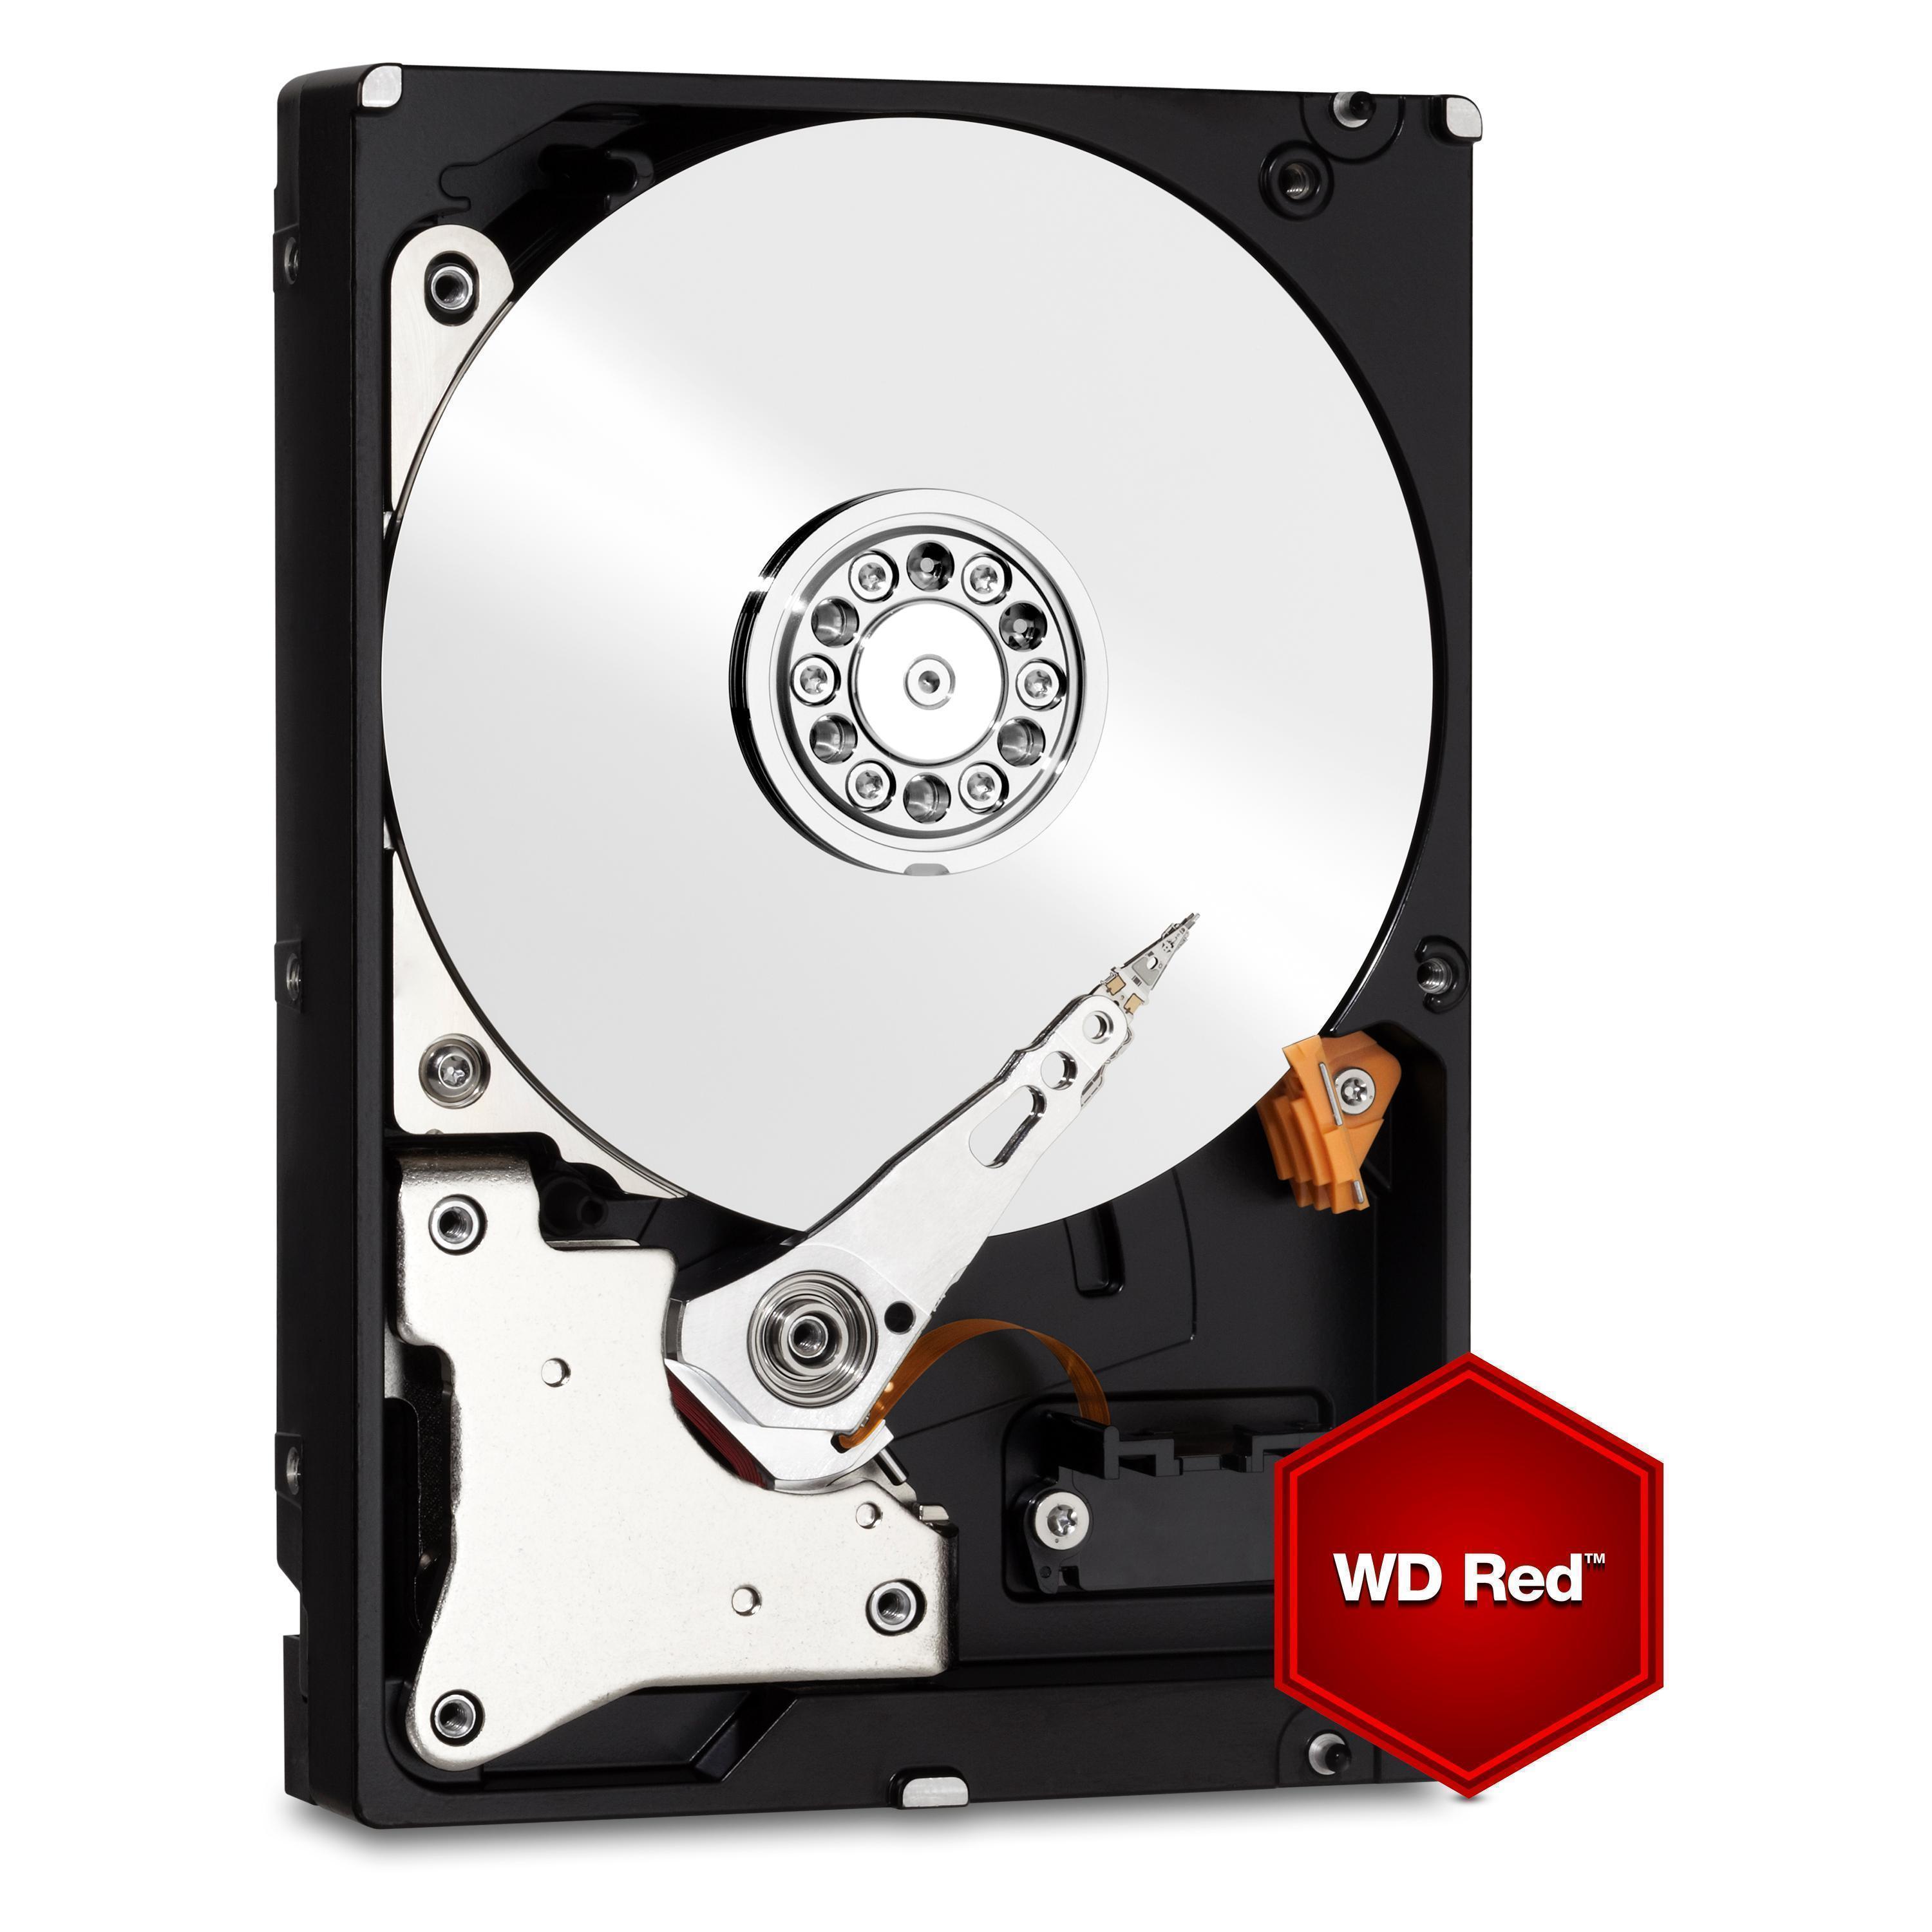 WD Red 1TB 64MB Cache Hard Disk Drive SATA 6gb/s - OEM | WD10EFRX ...